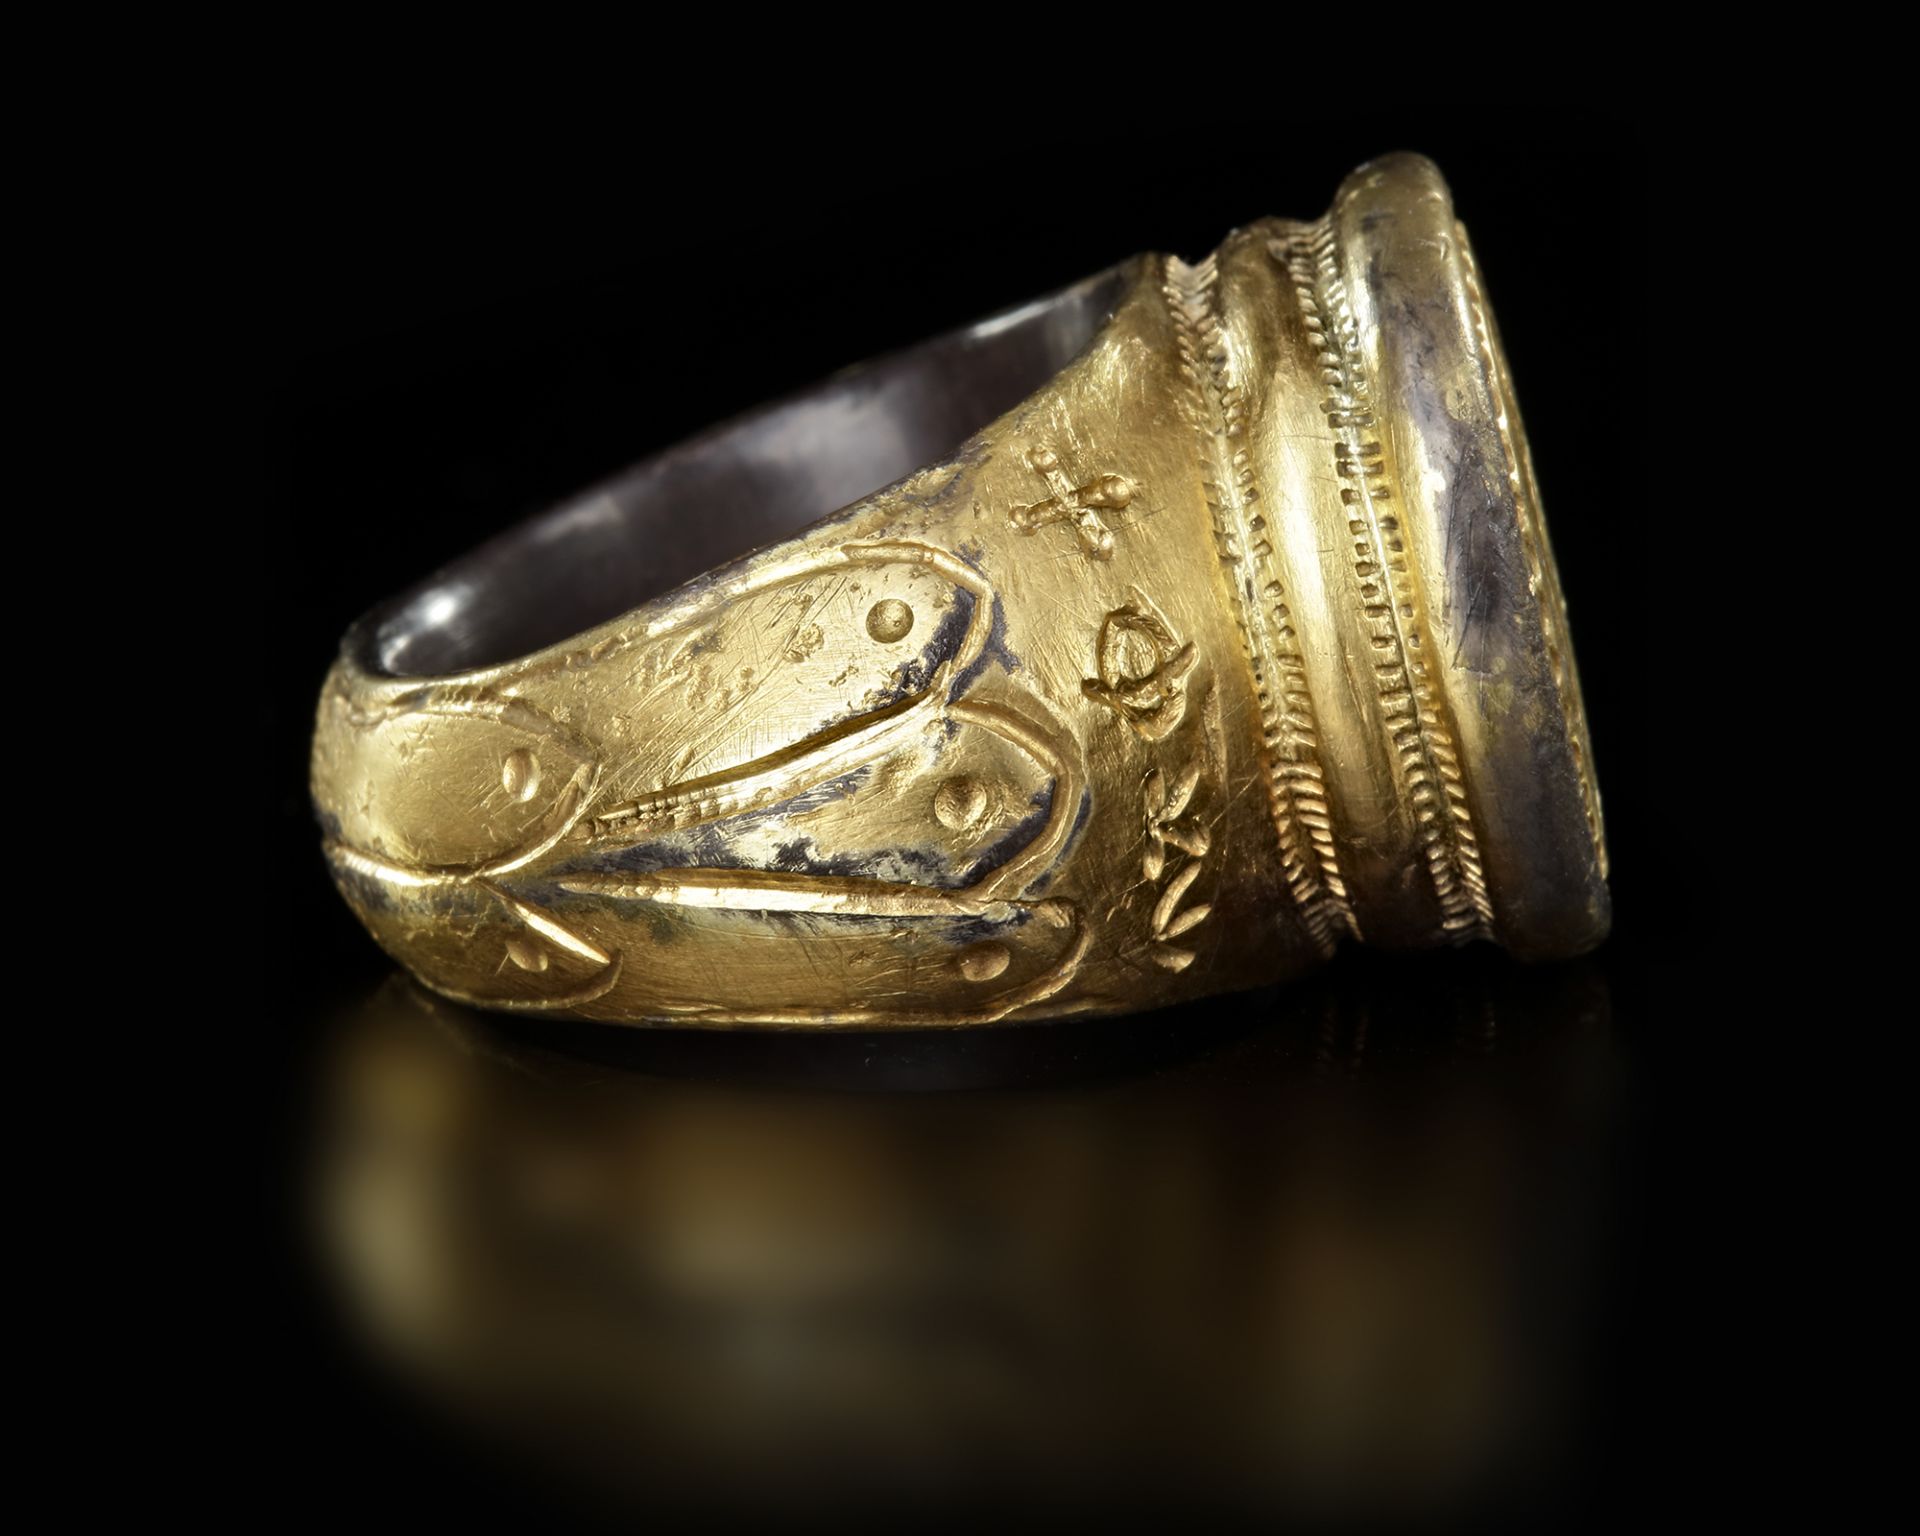 A LARGE SILVER GILT BYZANTINE RING, 8TH-10TH CENTURY AD - Image 4 of 5